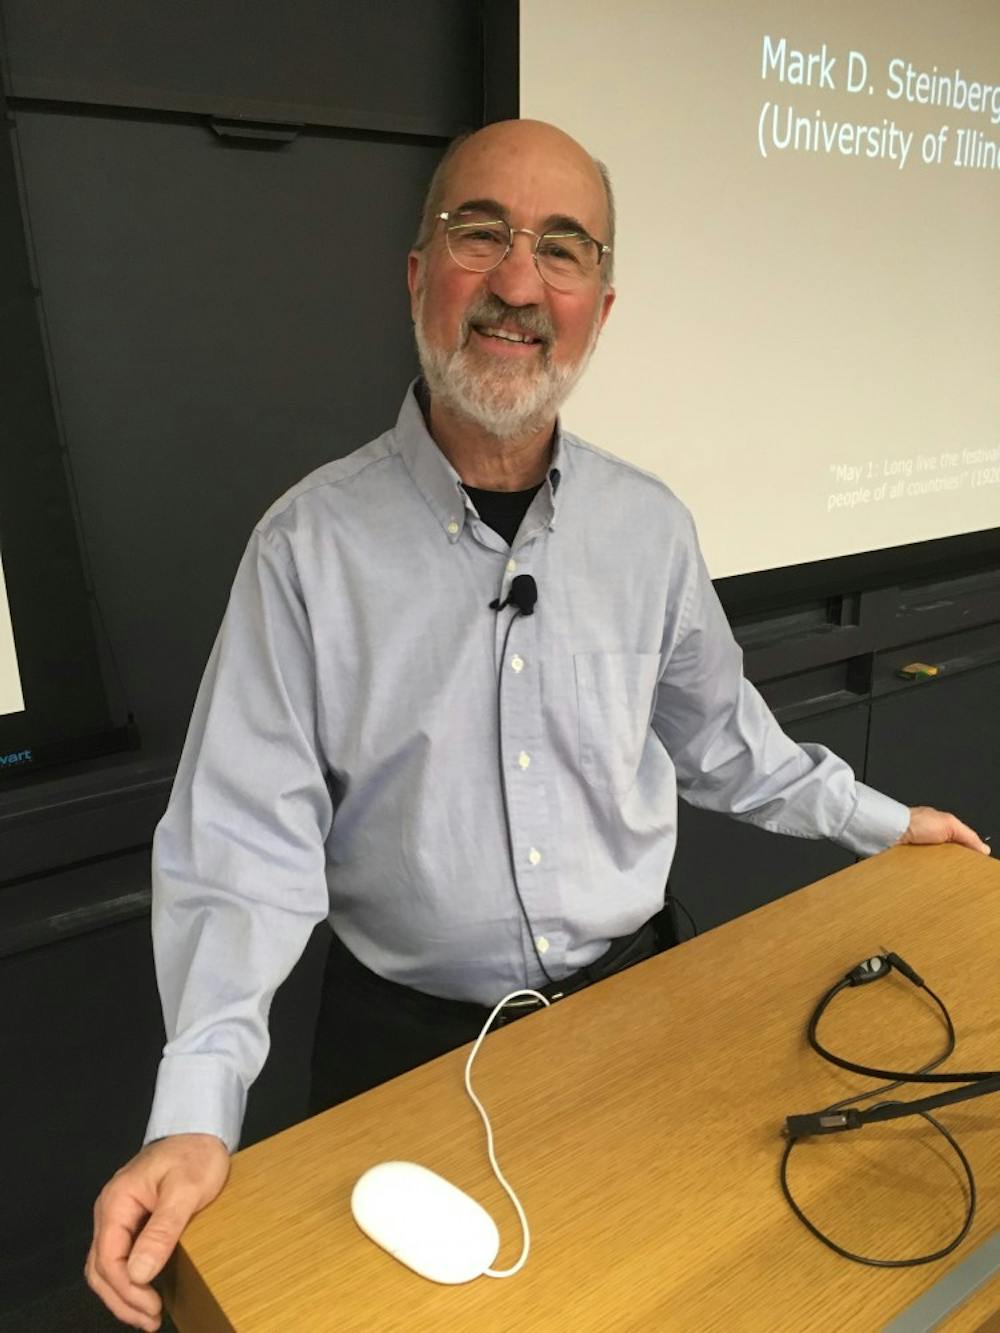 University of Illinois history professor Mark D. Steinberg at Tuesday's talk "From Necessity to Freedom: How a Utopian Impulse Carried Me Beyond the Disenchantment of Outcomes"